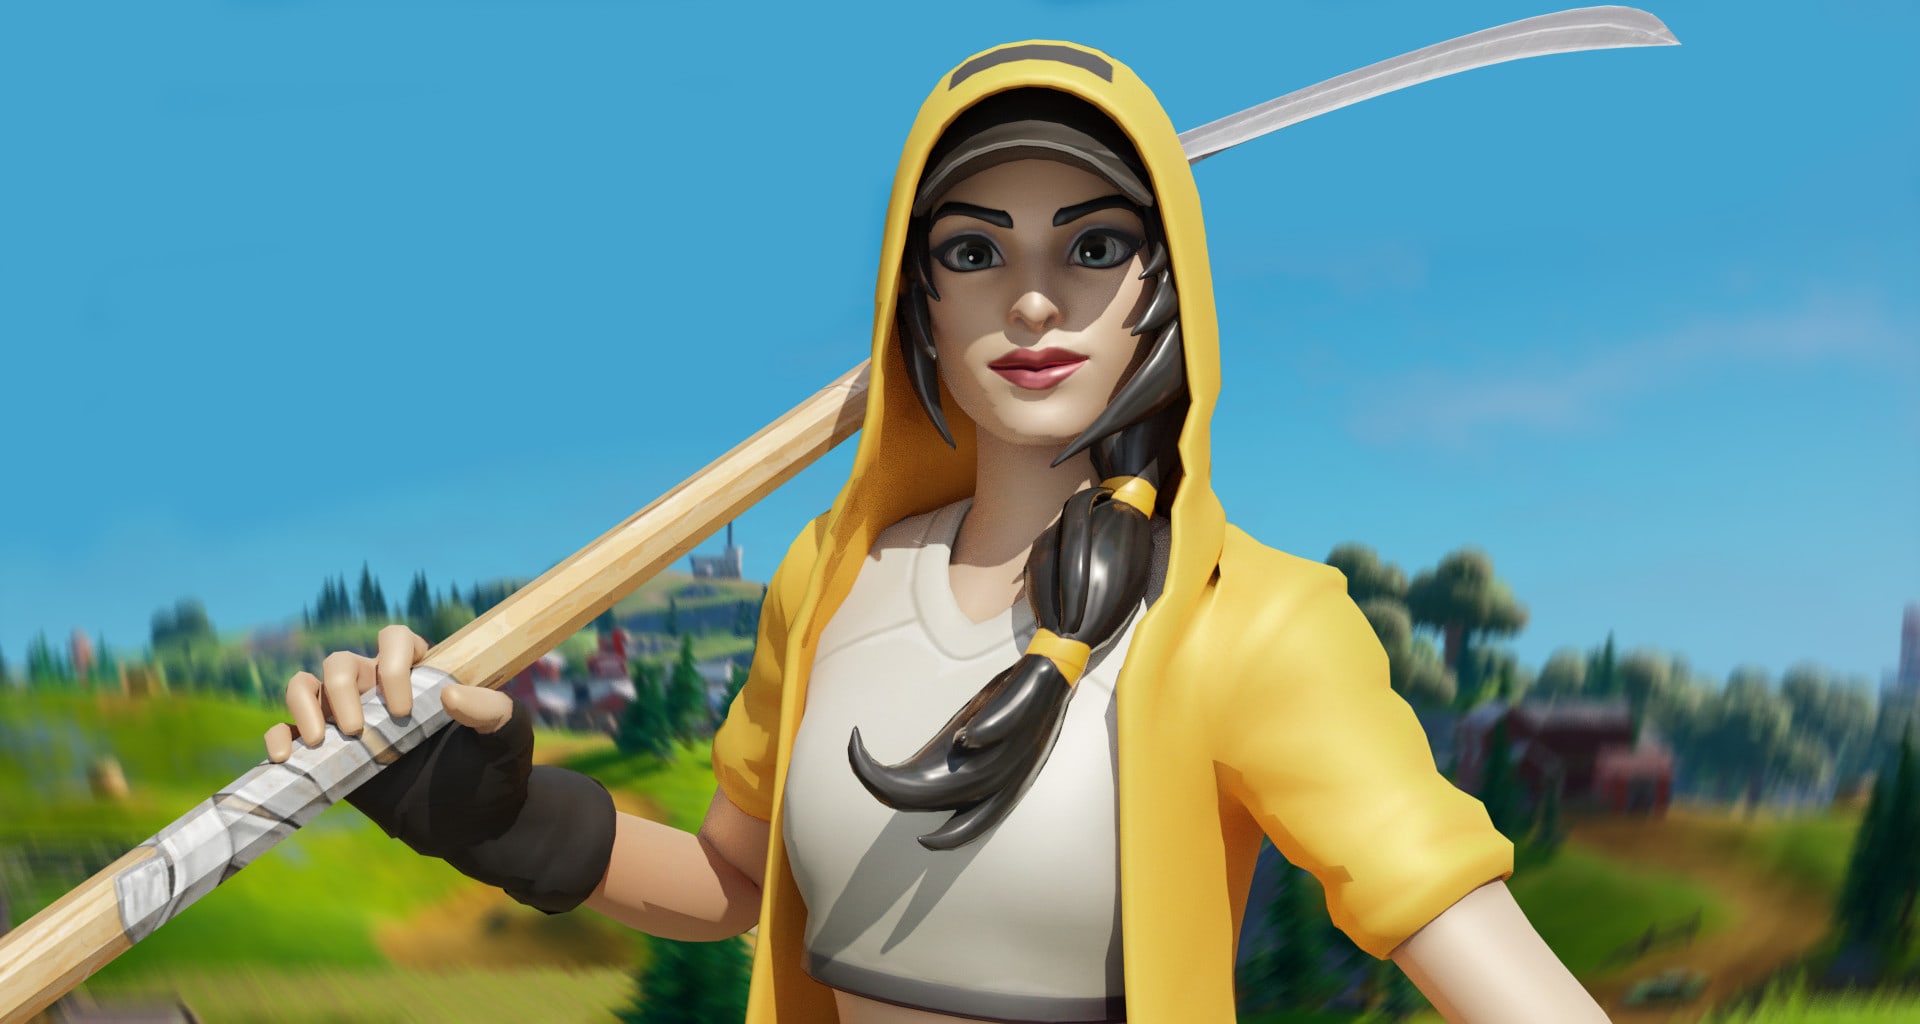 Blender Logos Fortnite Skins Make You Fortnite Logo With Any Skin And Background By Zabozrout Fiverr